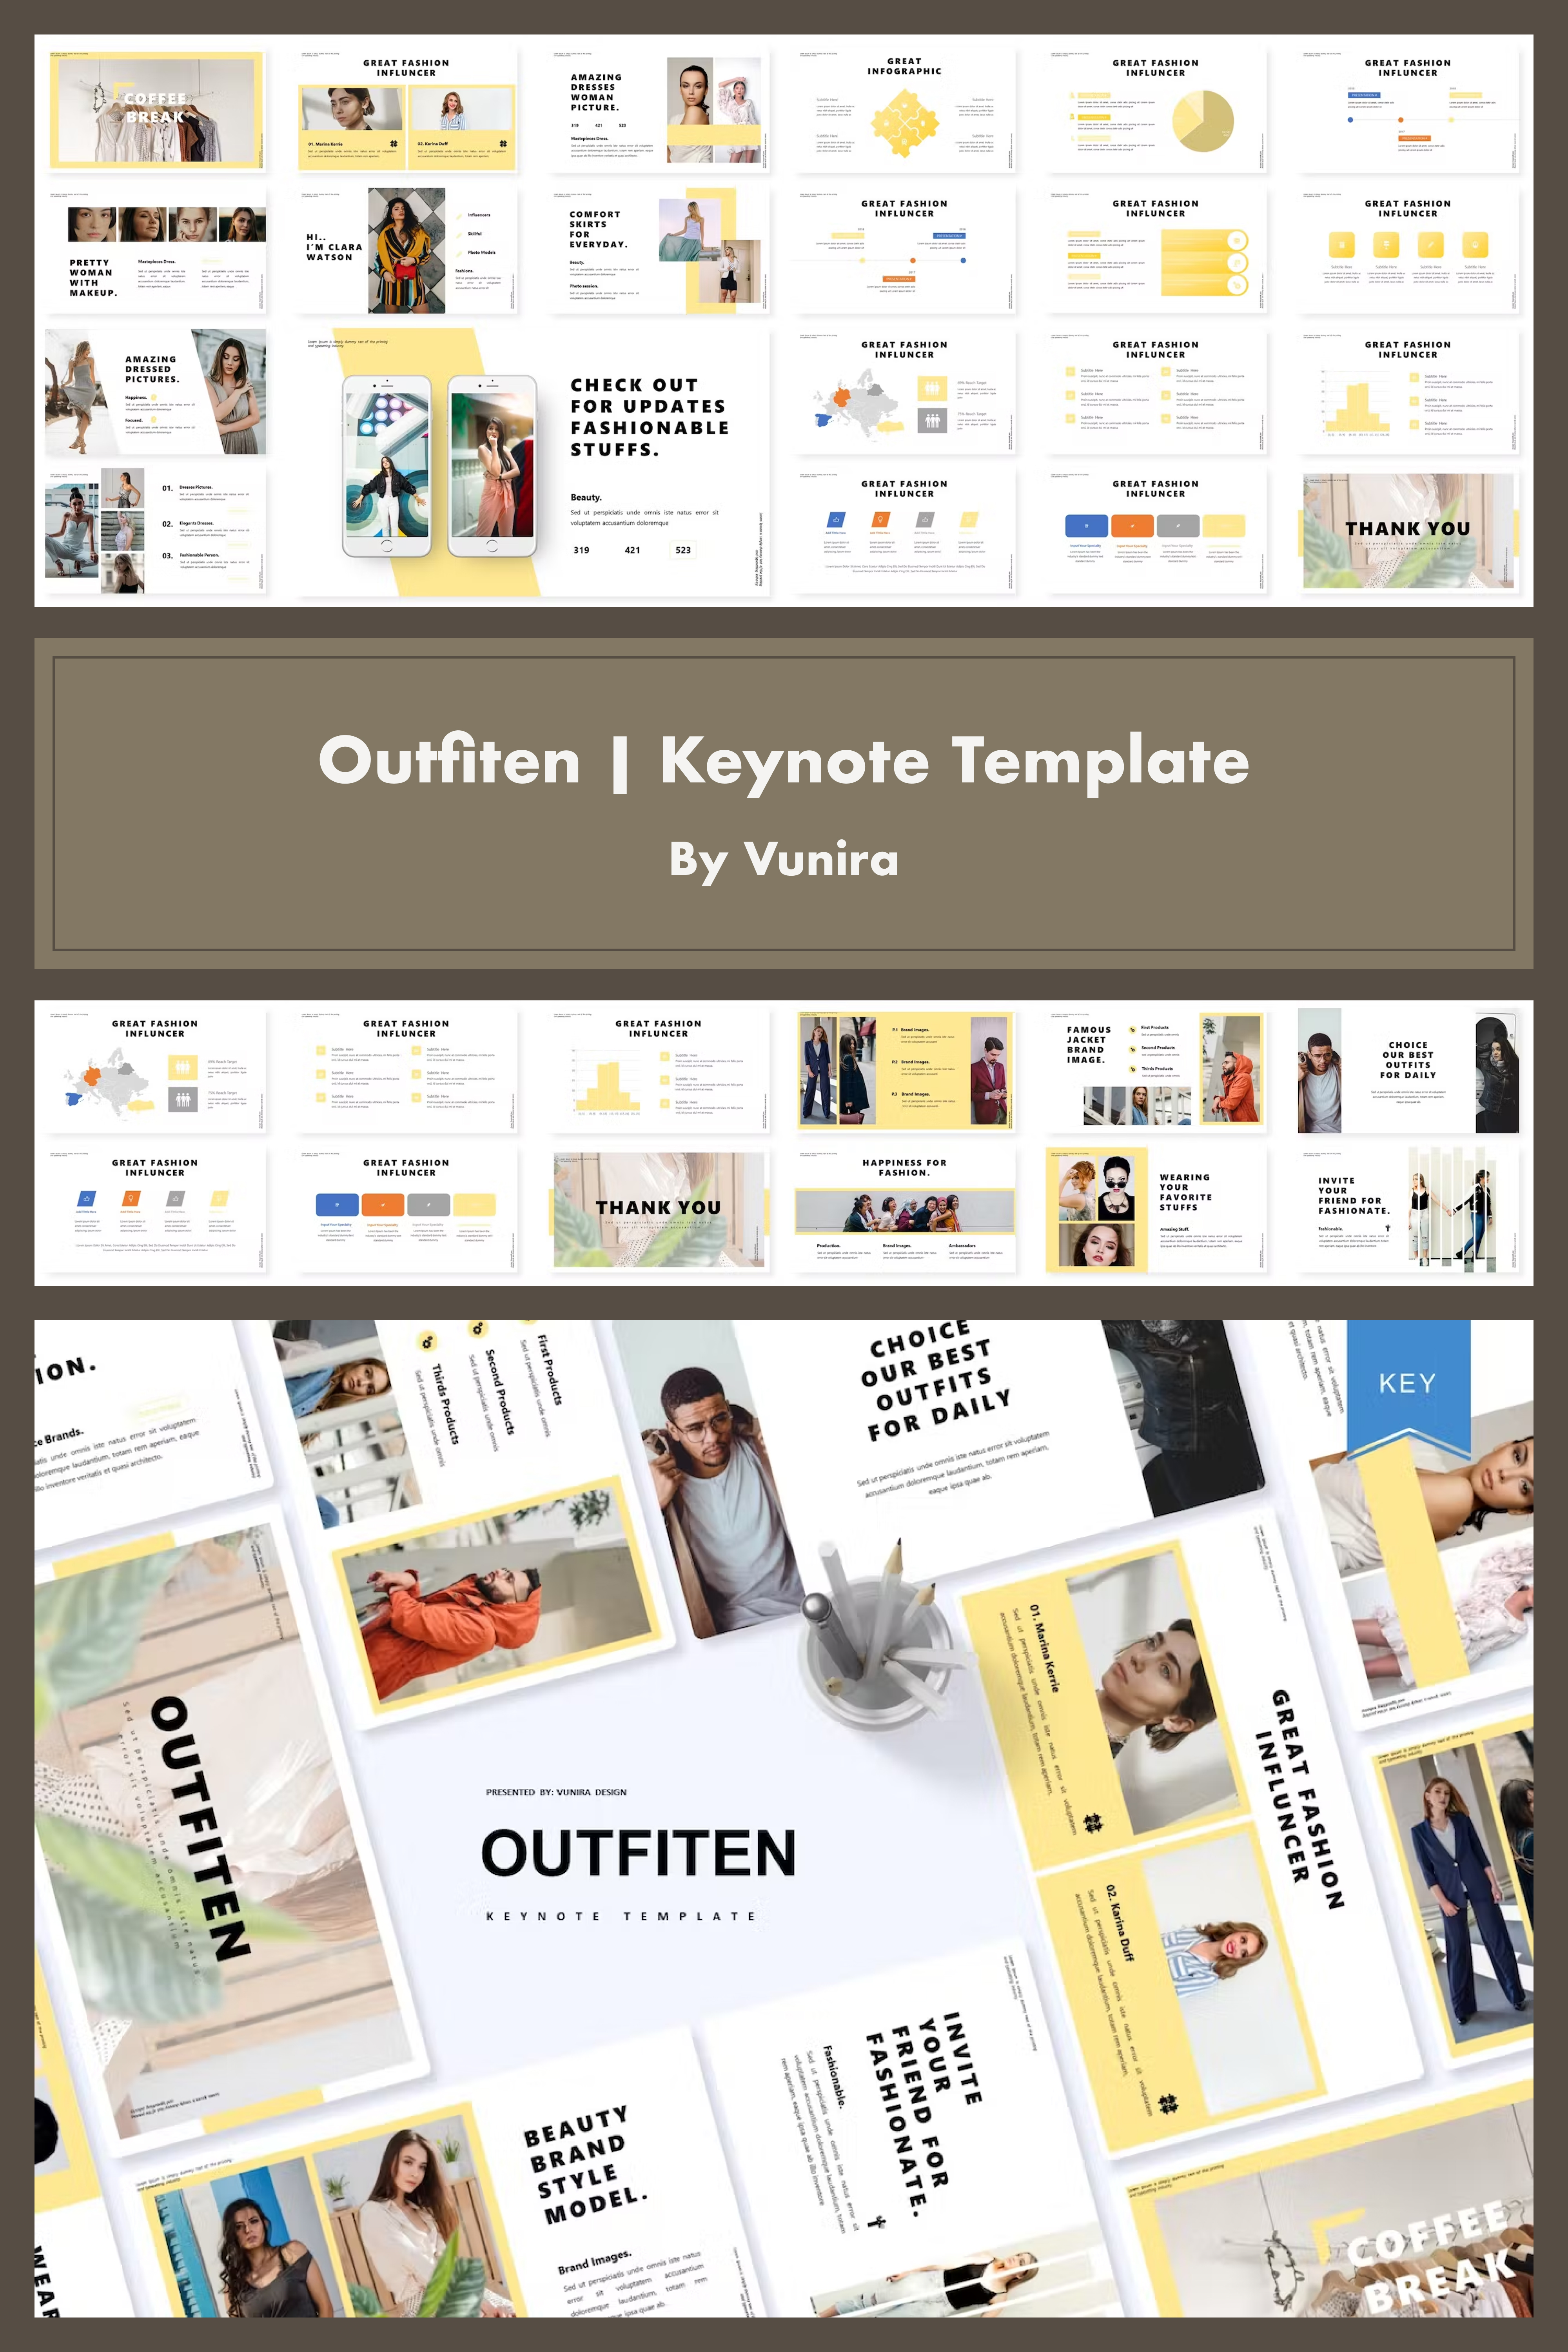 Outfiten keynote template of pinterest.